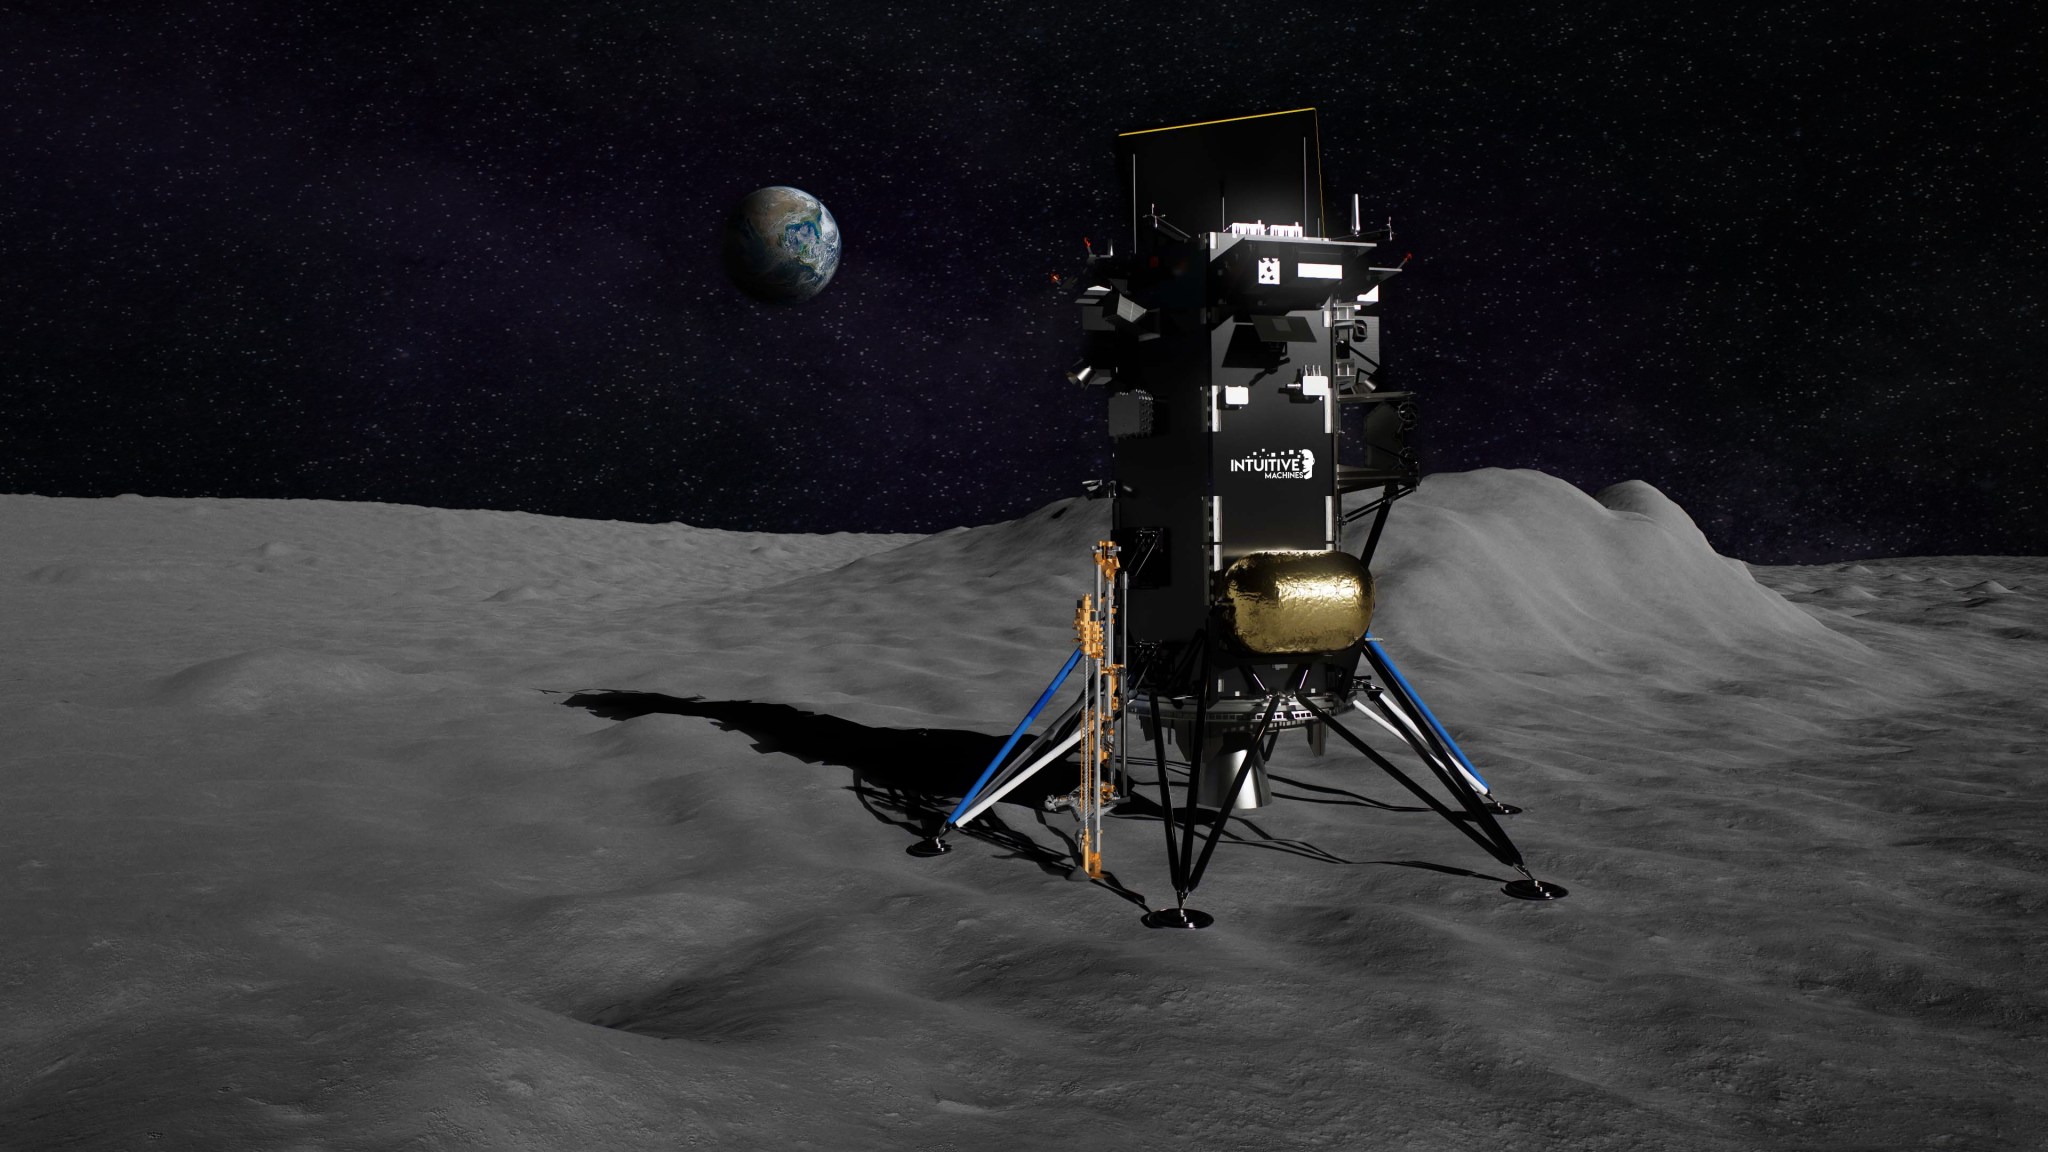 Illustration of Intuitive Machines’ Nova-C lander with a depiction of NASA’s the Polar Resources Ice-Mining Experiment-1 attached to the spacecraft on the surface of the Moon. 